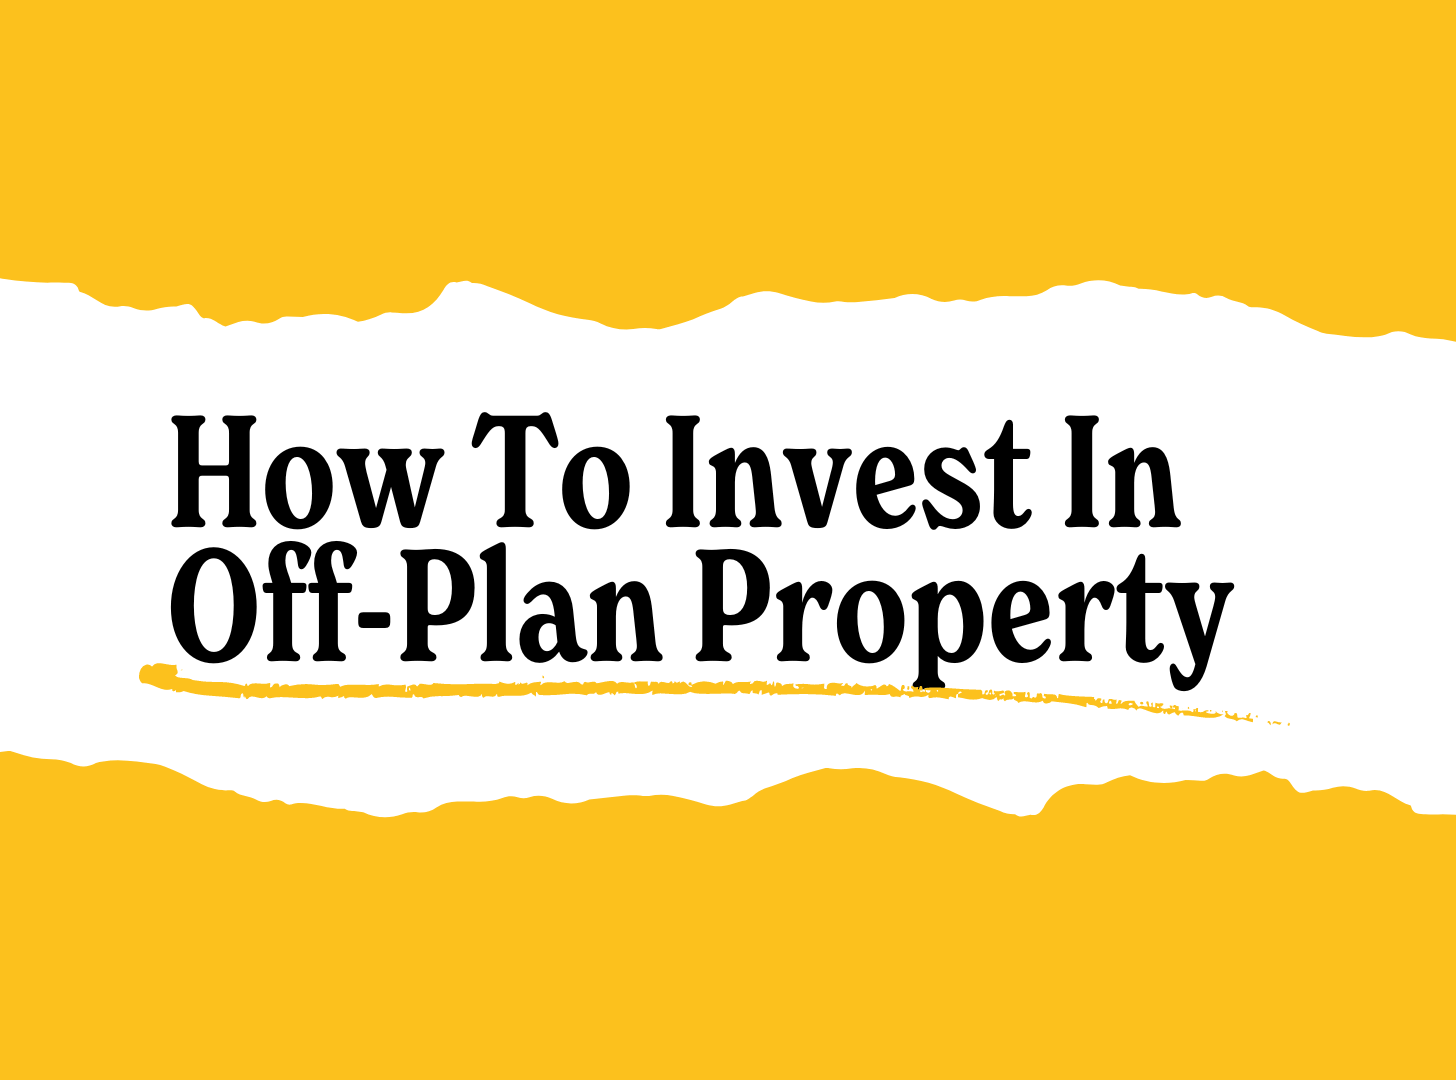 How To Invest In Off-Plan Property